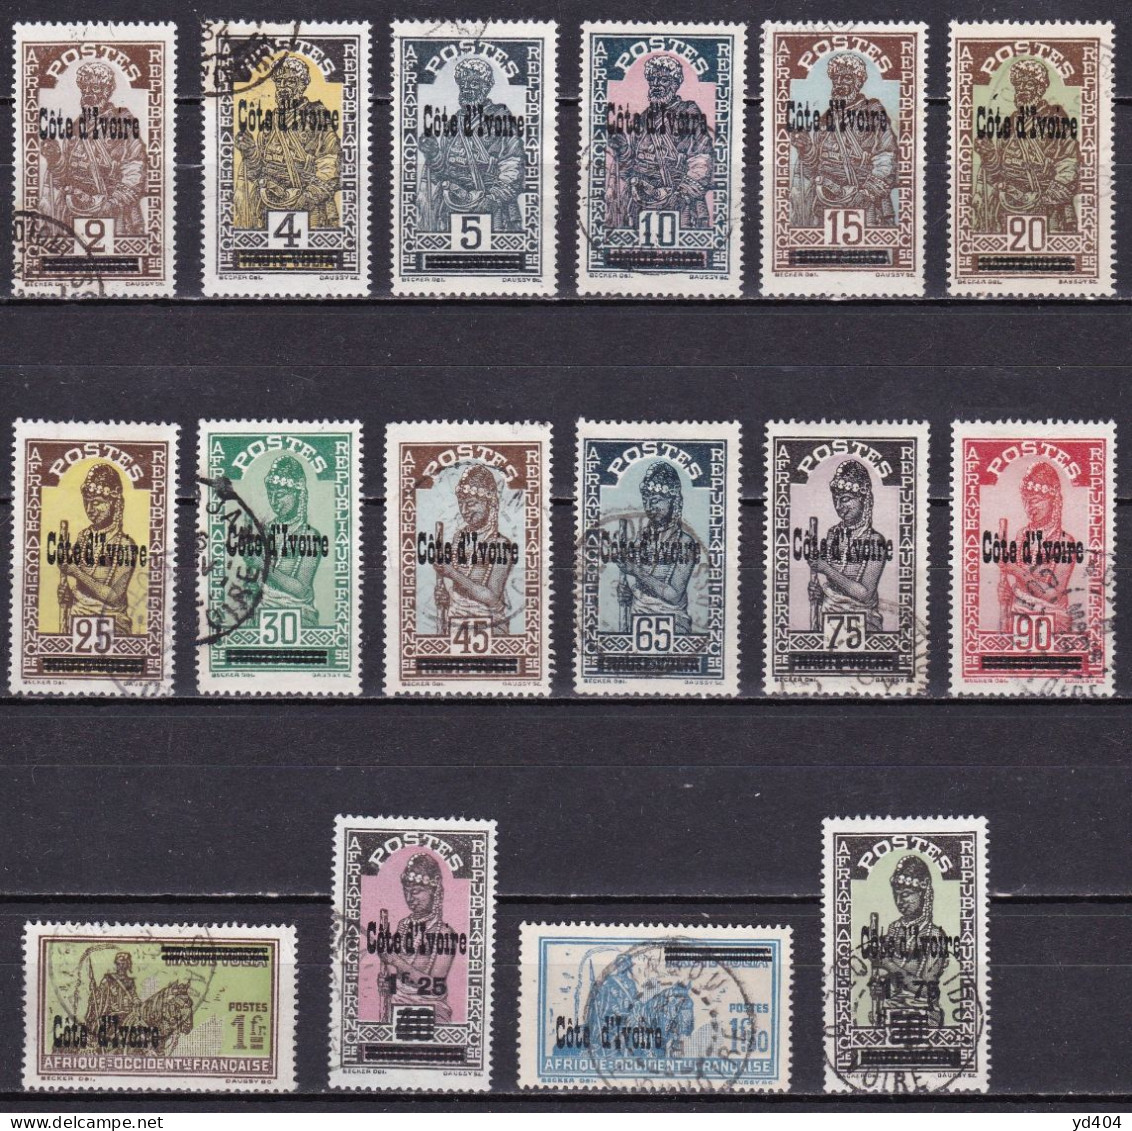 CF-CI-06 – FRENCH COLONIES – IVORY COAST – 1933 – UPPER VOLTA ST. OVERPR. – SG # 98/113 USED 93 € - Used Stamps